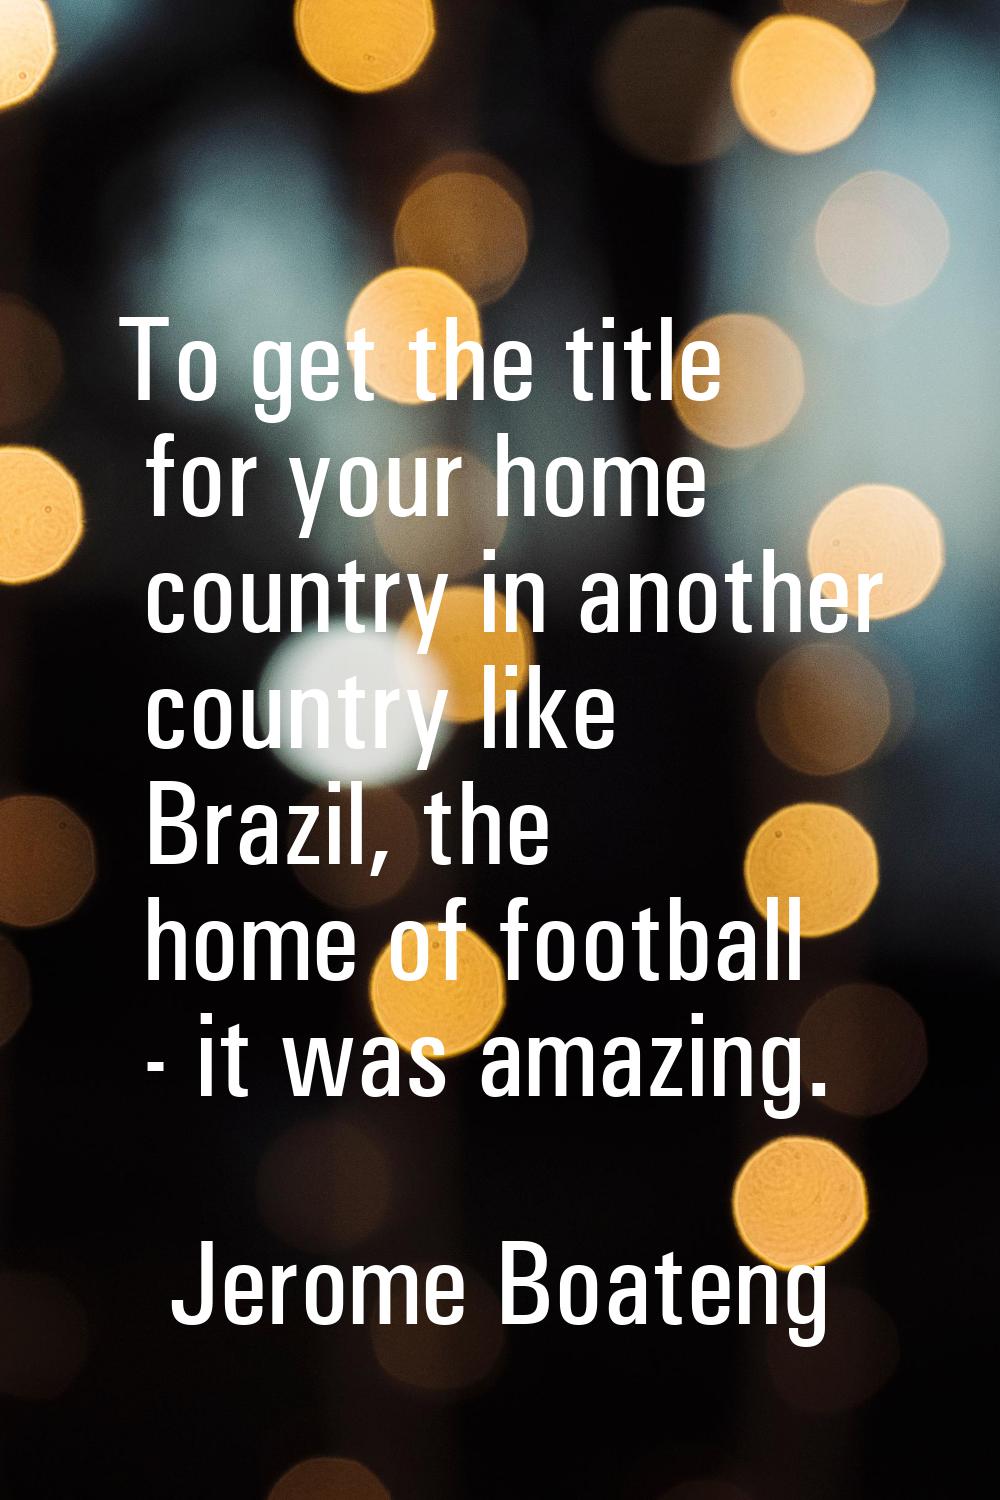 To get the title for your home country in another country like Brazil, the home of football - it wa